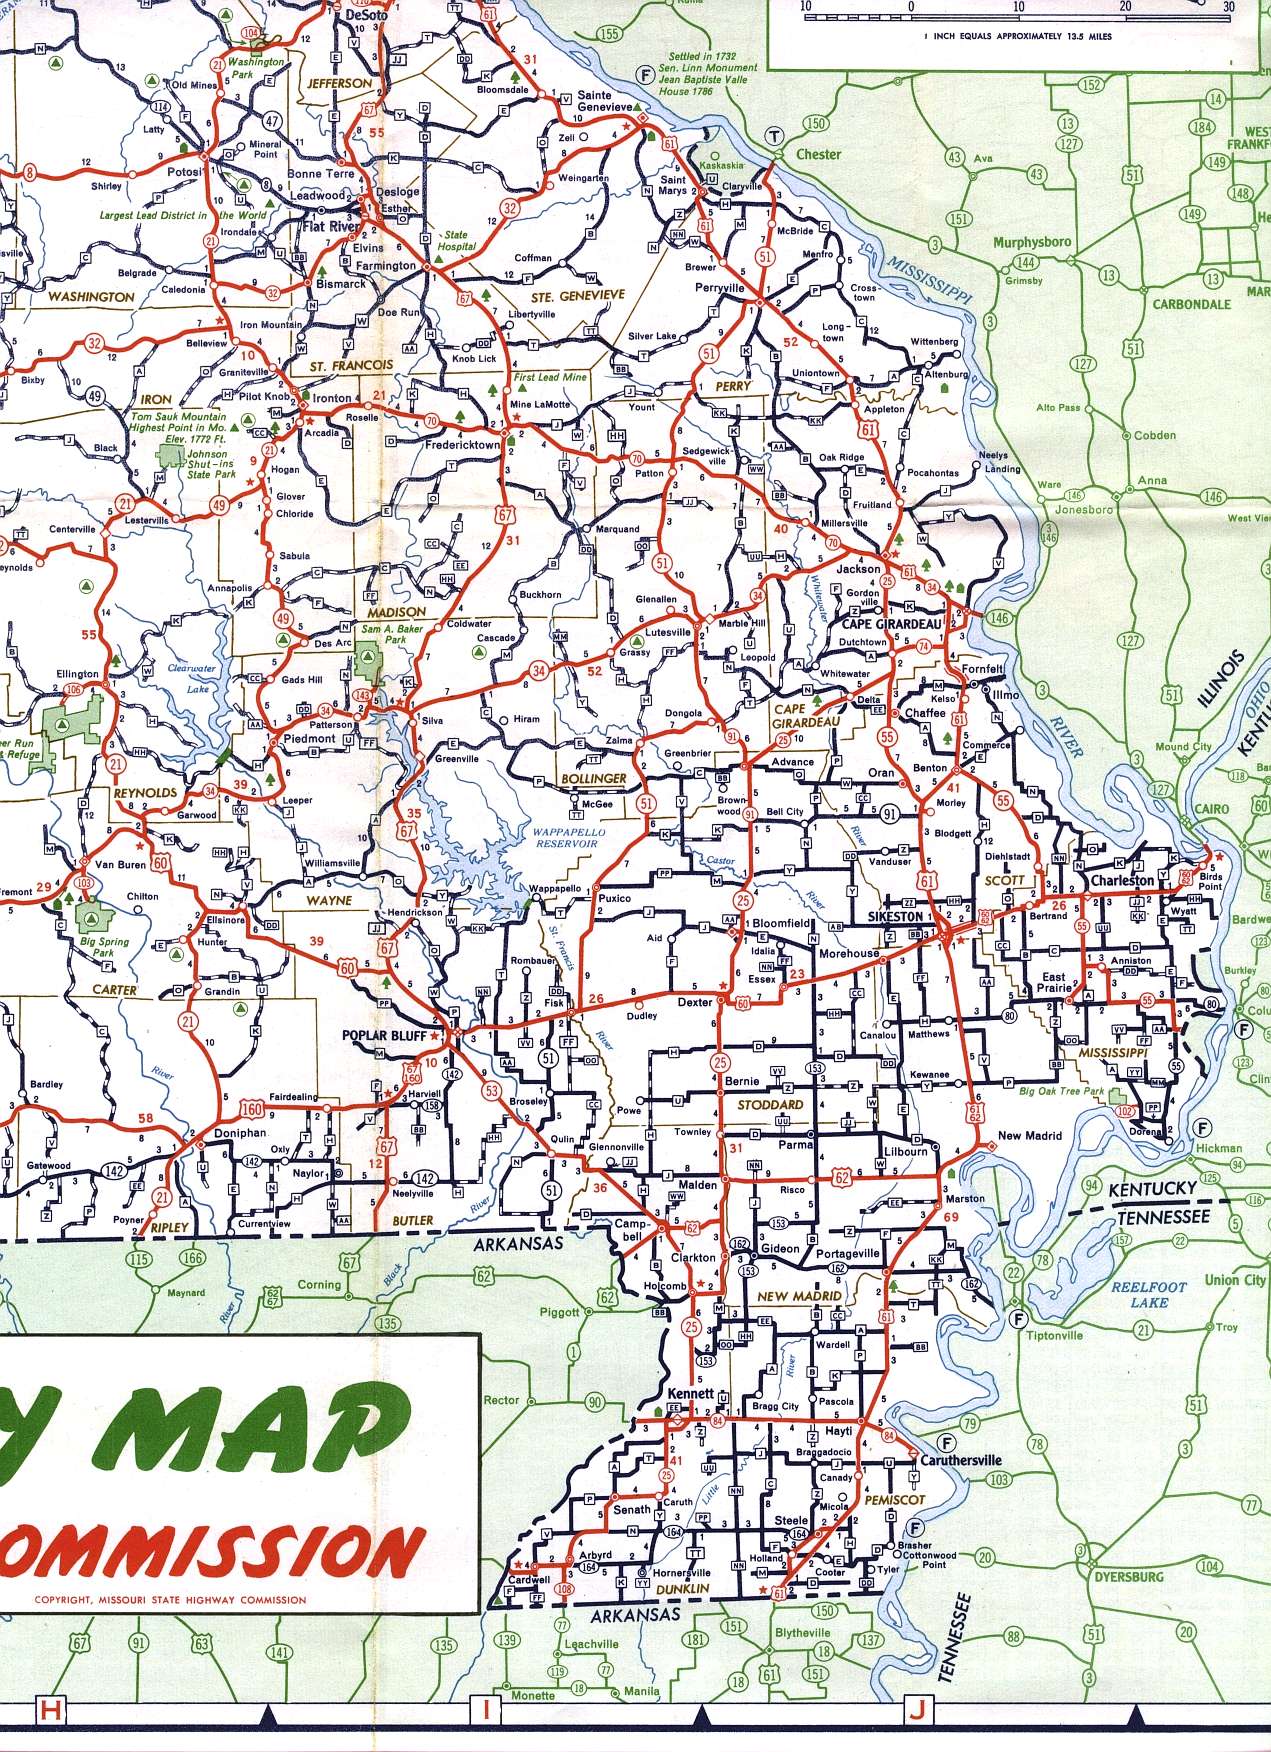 Bootheel section of Missouri from 1958 official highway map